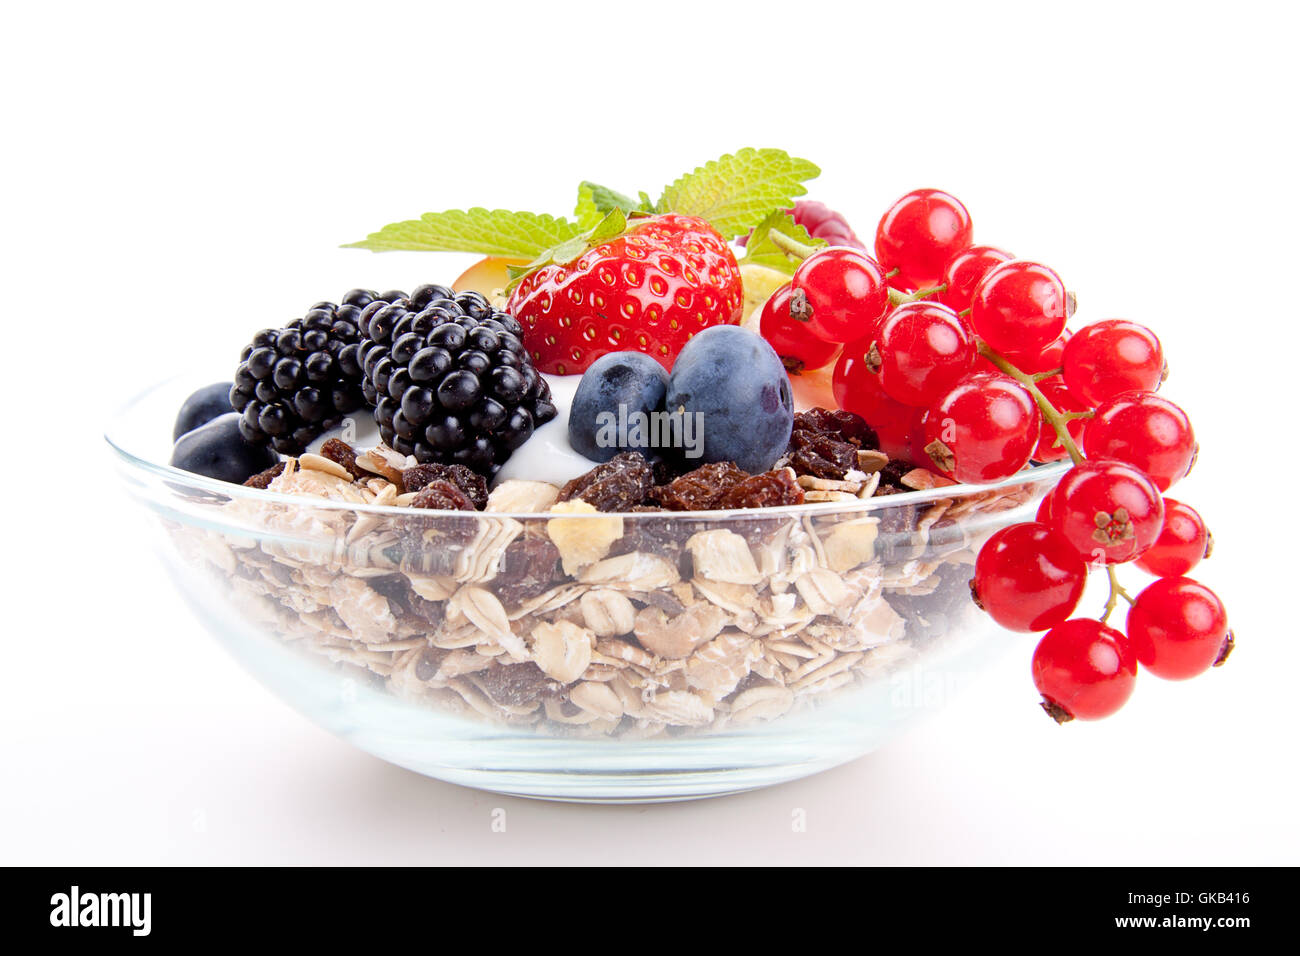 delicious healthy breakfast with cornflakes and fruit isoli Stock Photo